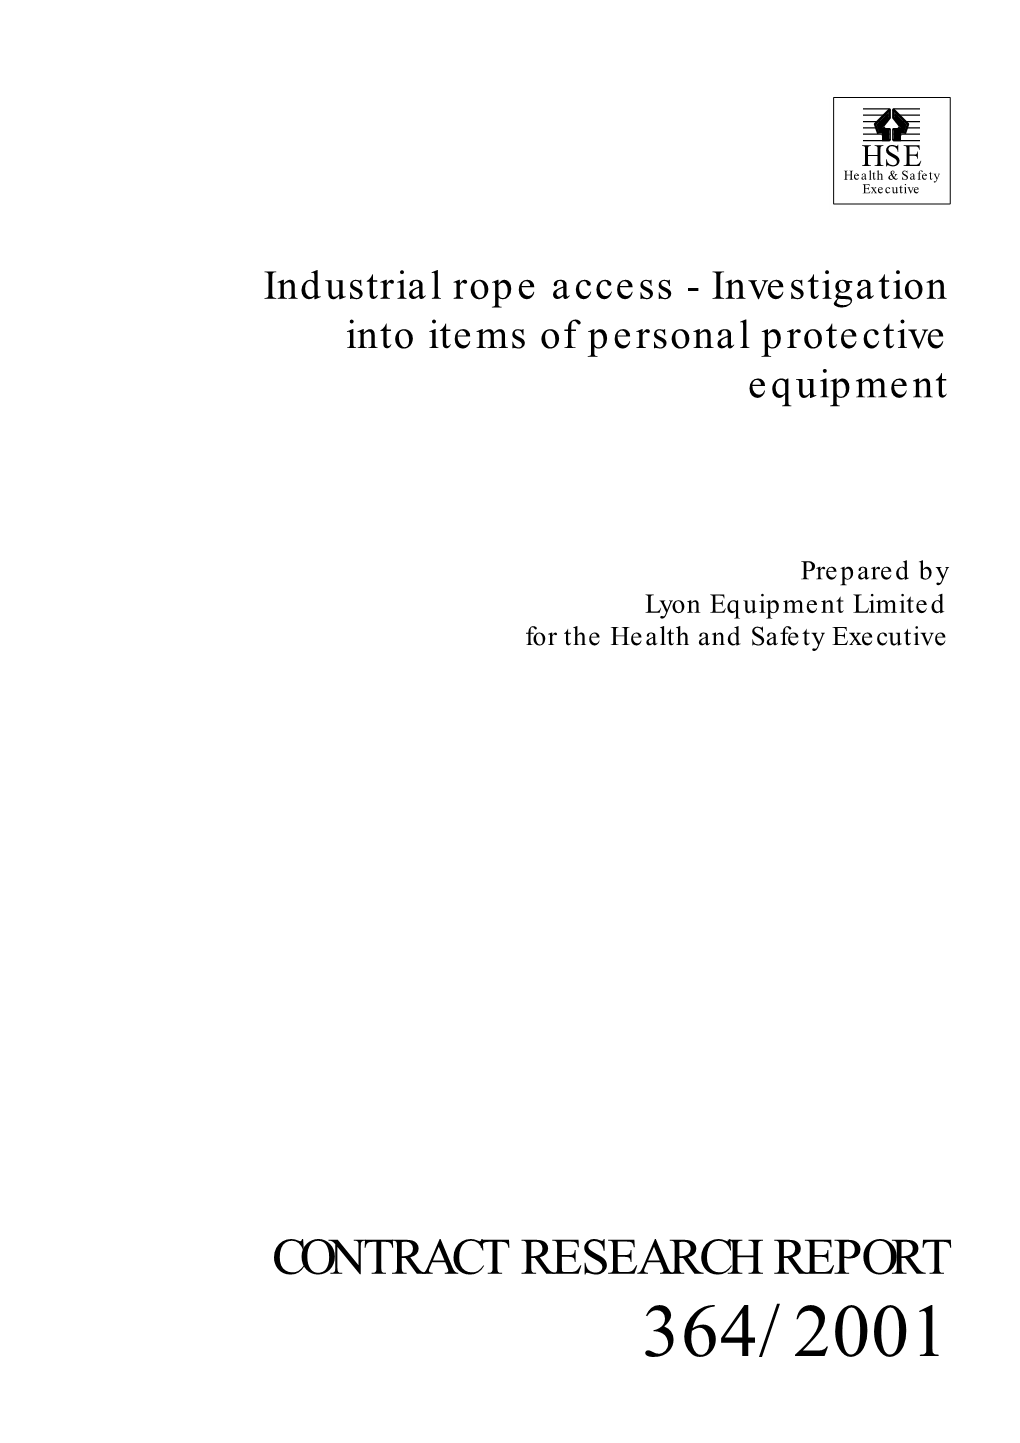 Industrial Rope Access - Investigation Into Items of Personal Protective Equipment